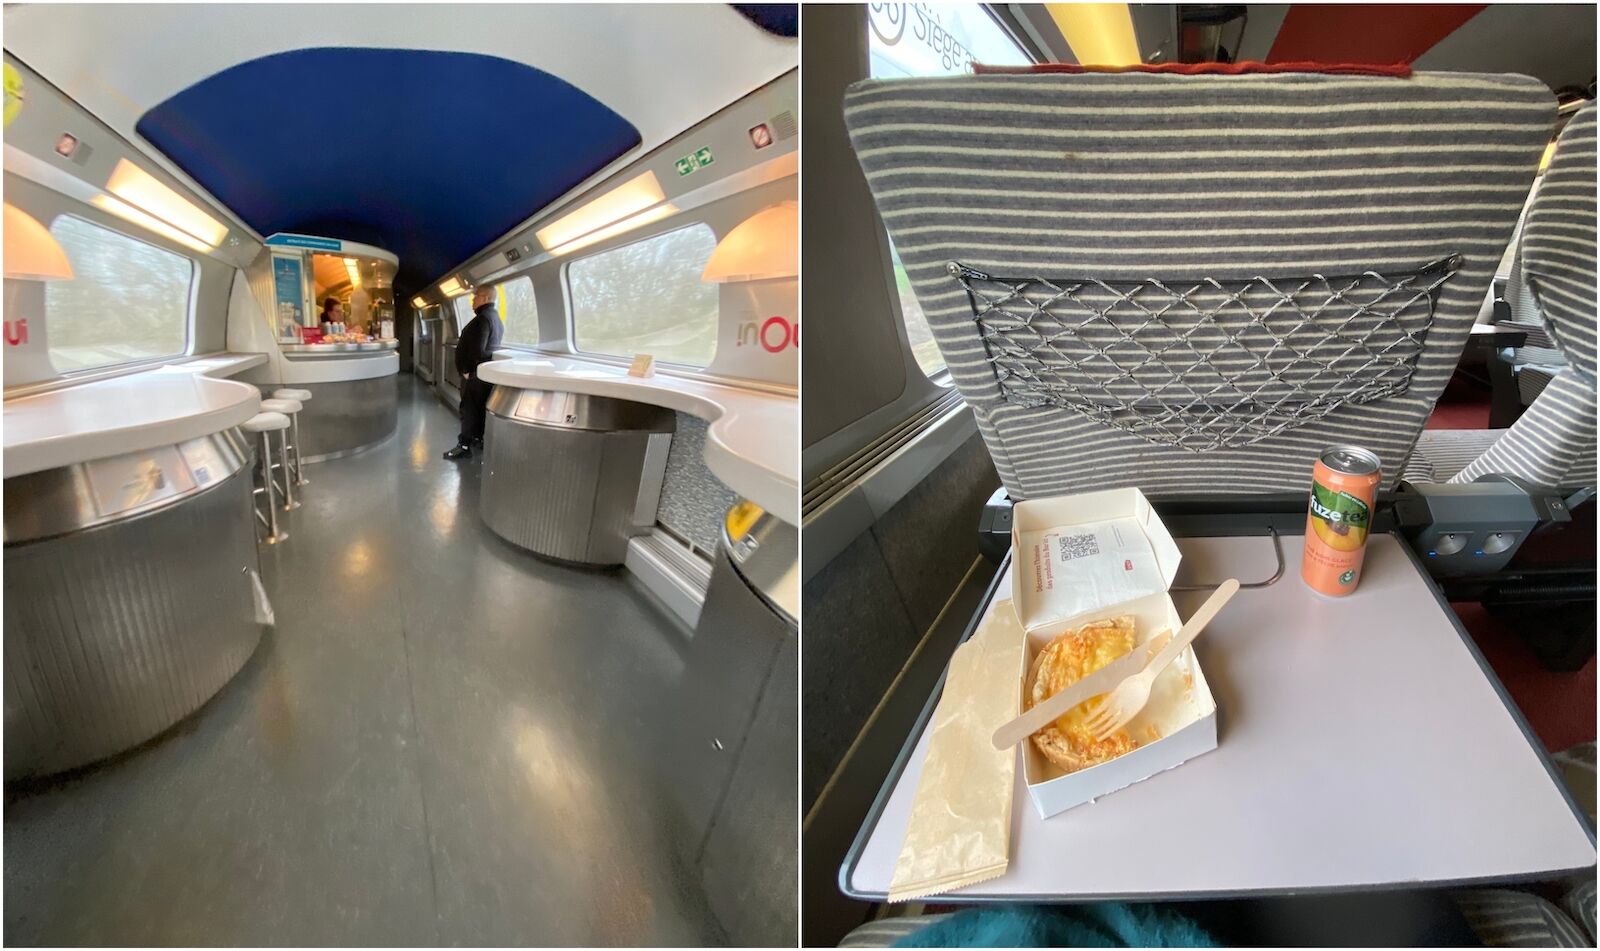 cafe/restaurant car and meals on the French TGV